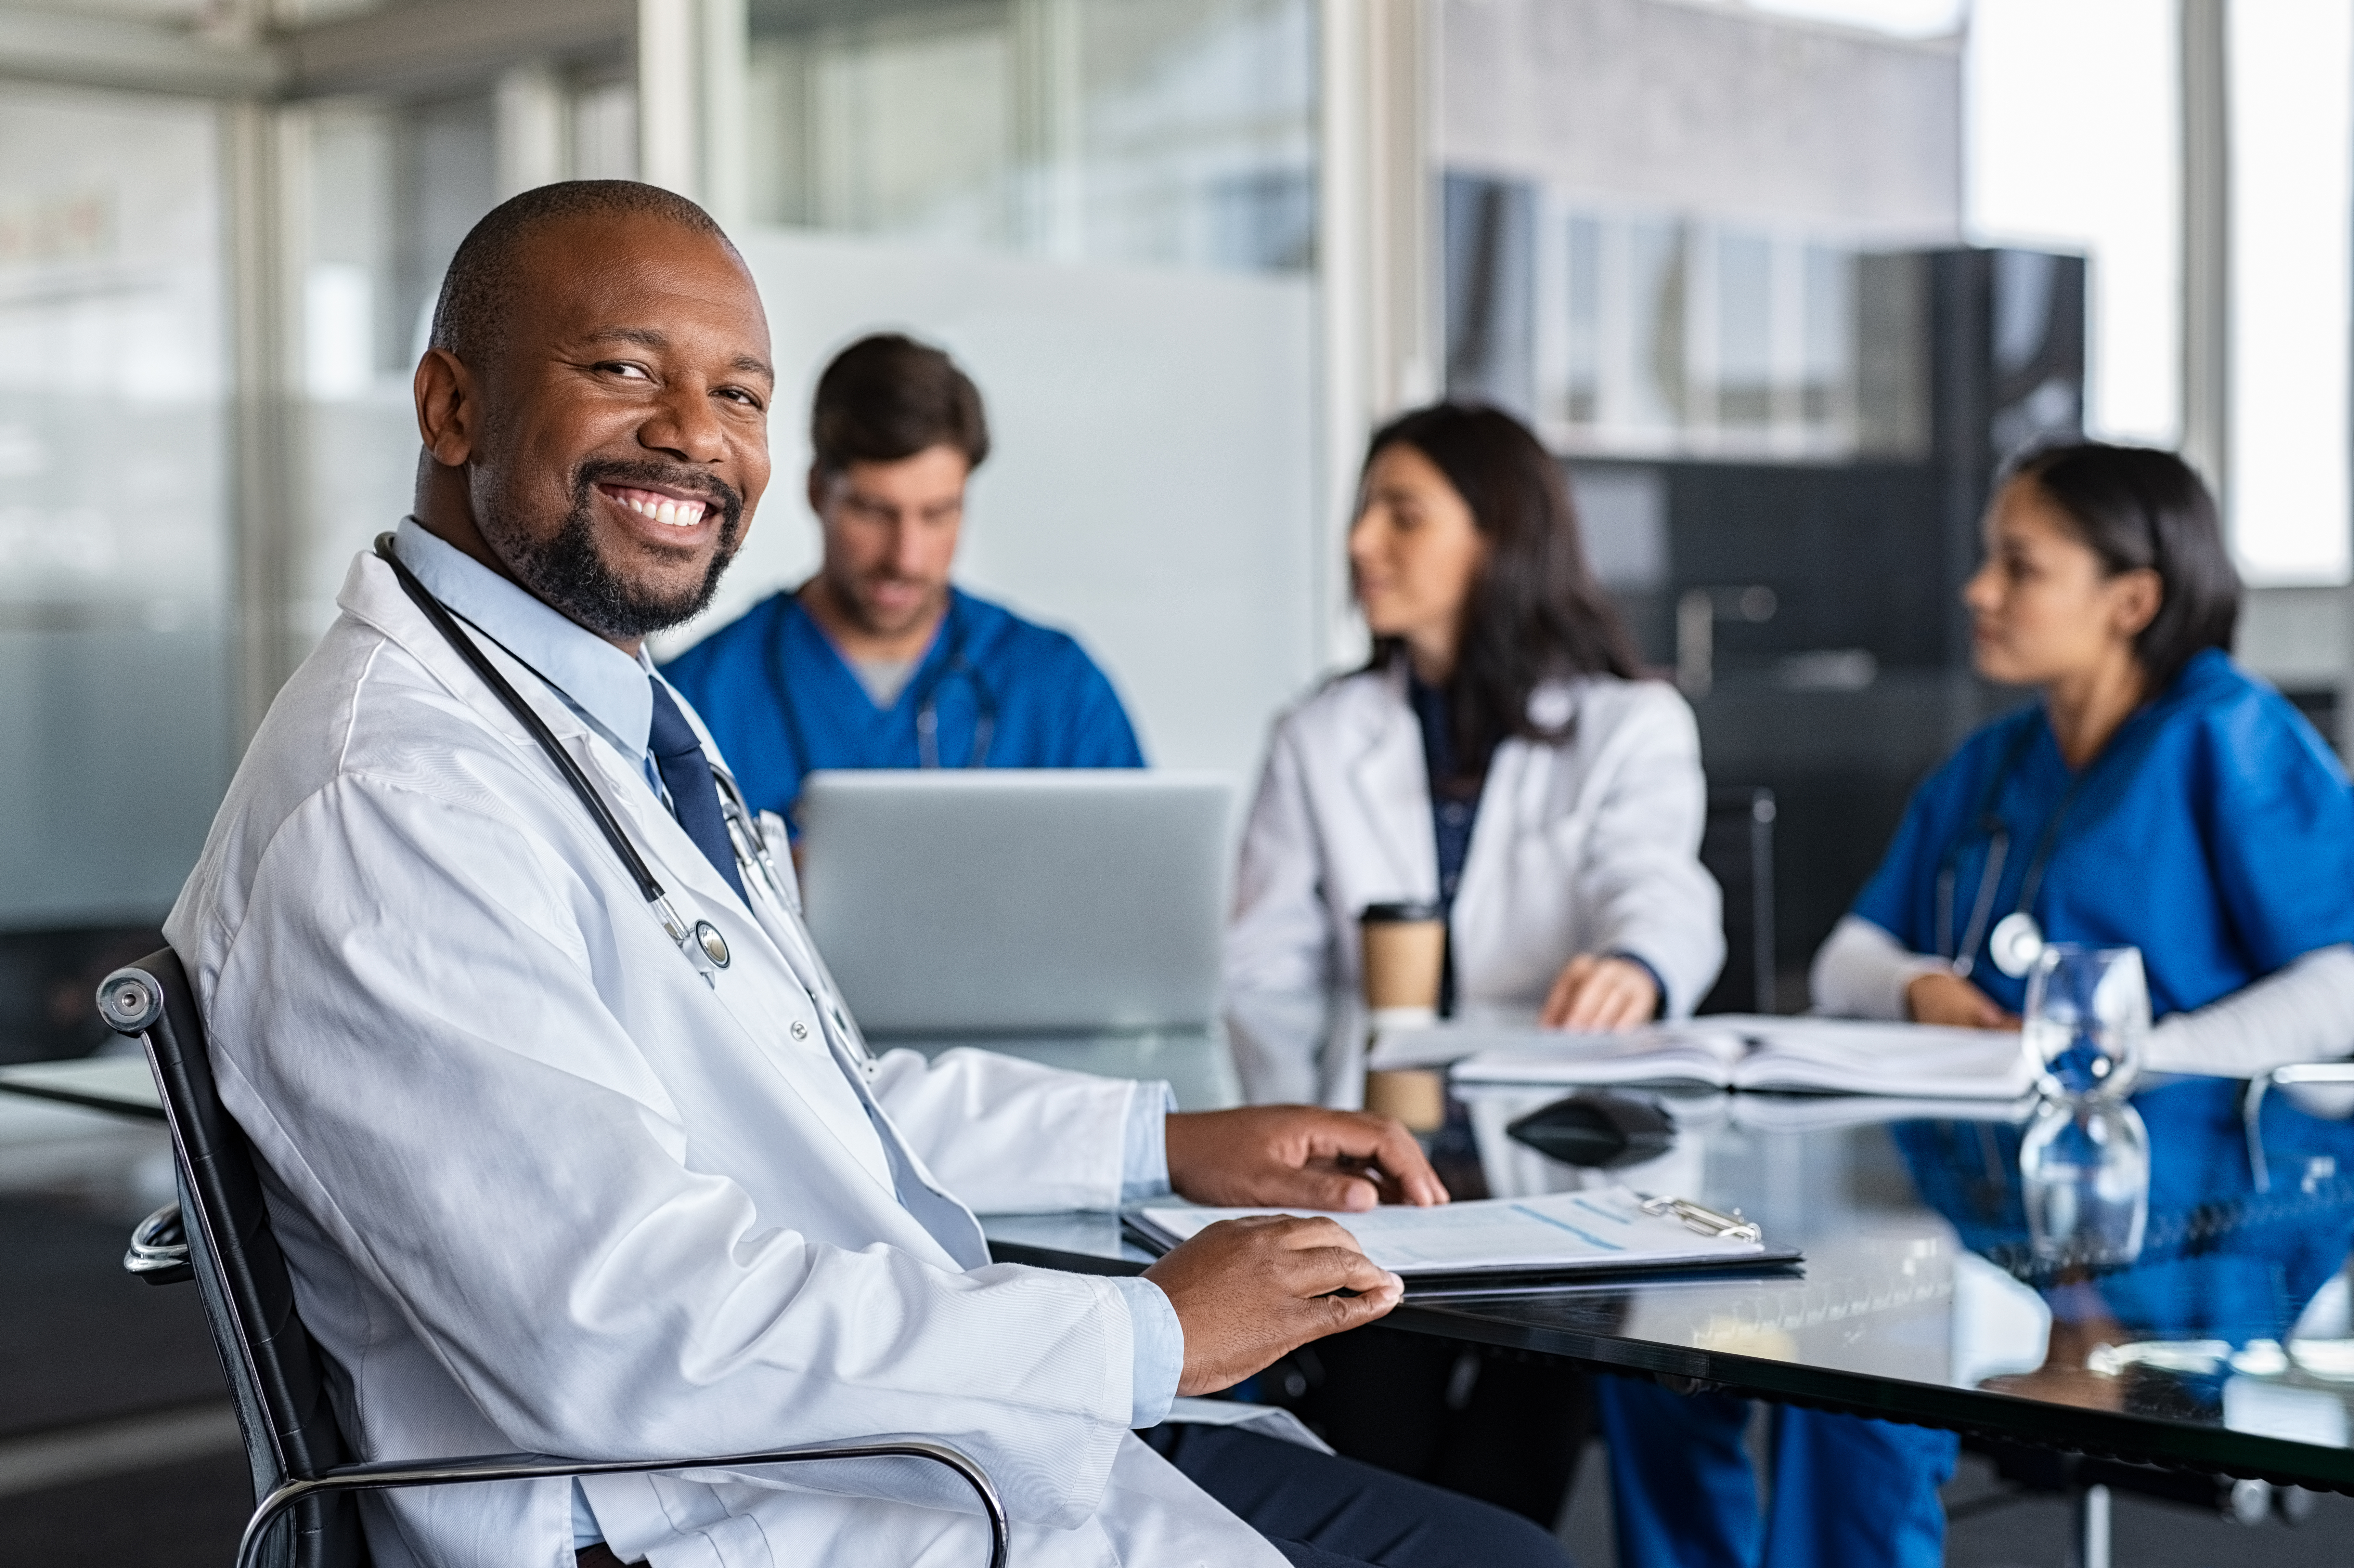 6 Compelling Reasons to Utilize Locum Tenens at Your Facility